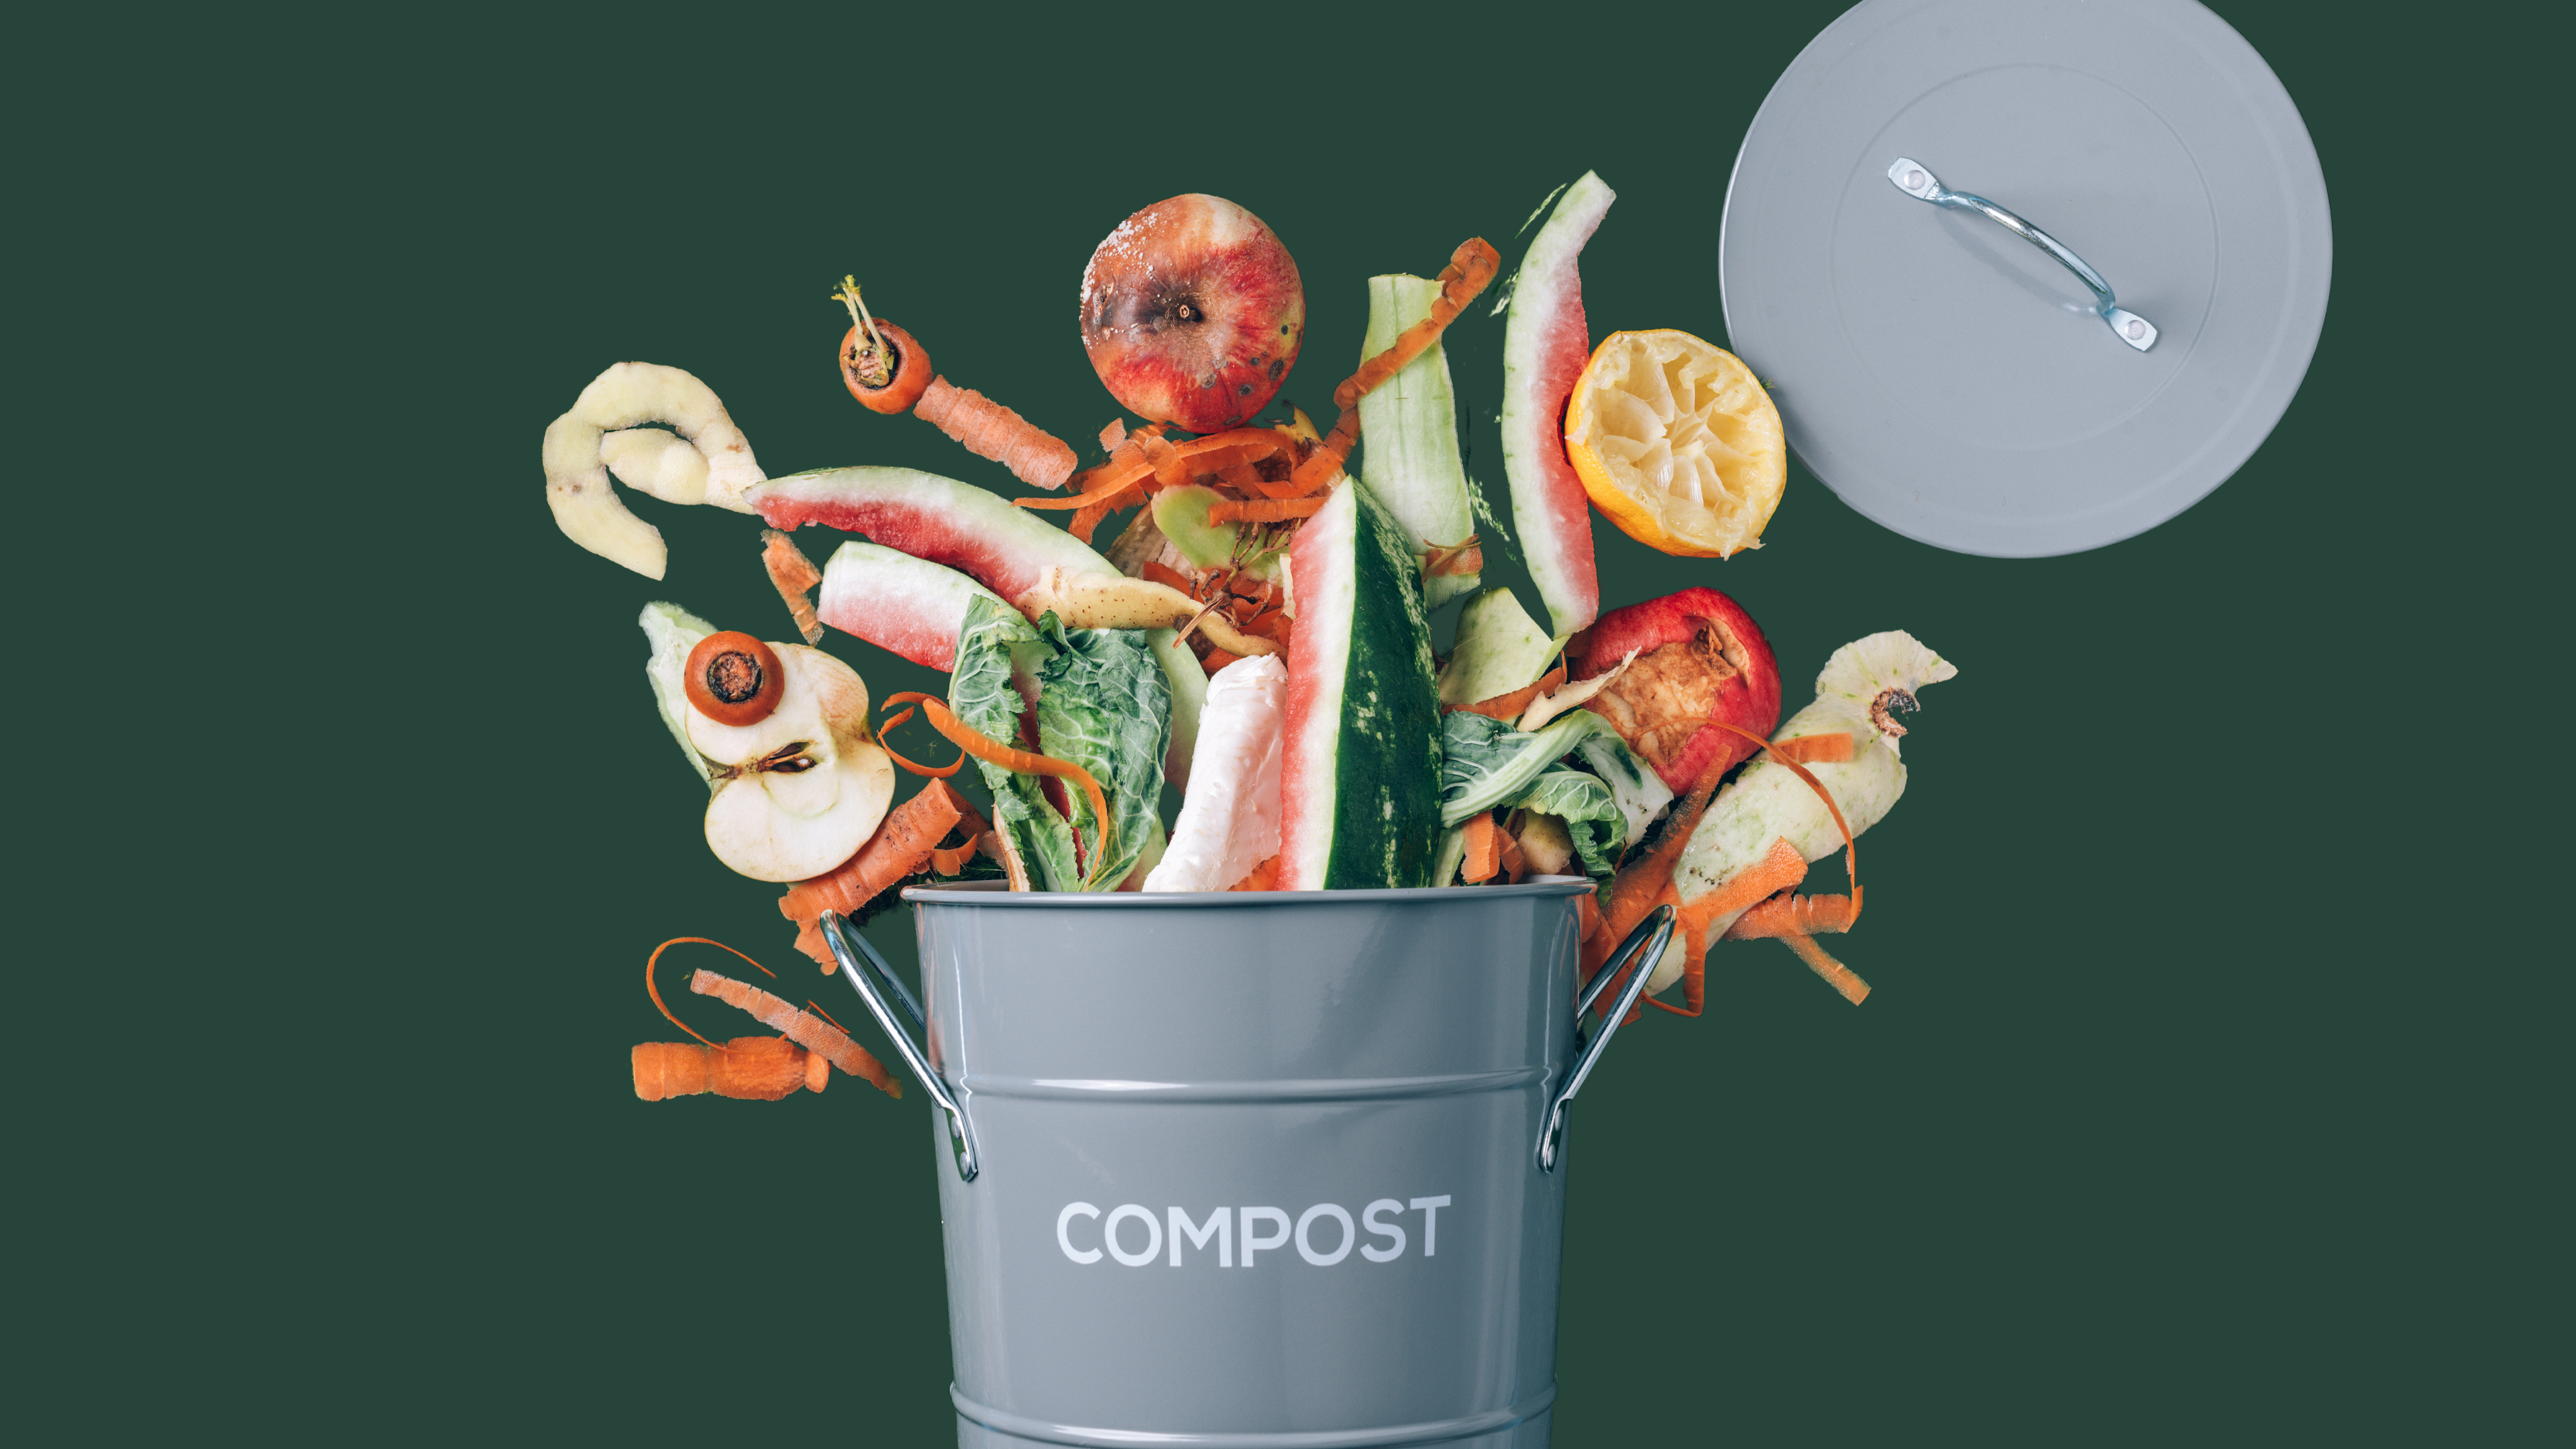 Compost Rules Have Changed. Learn to sort right.